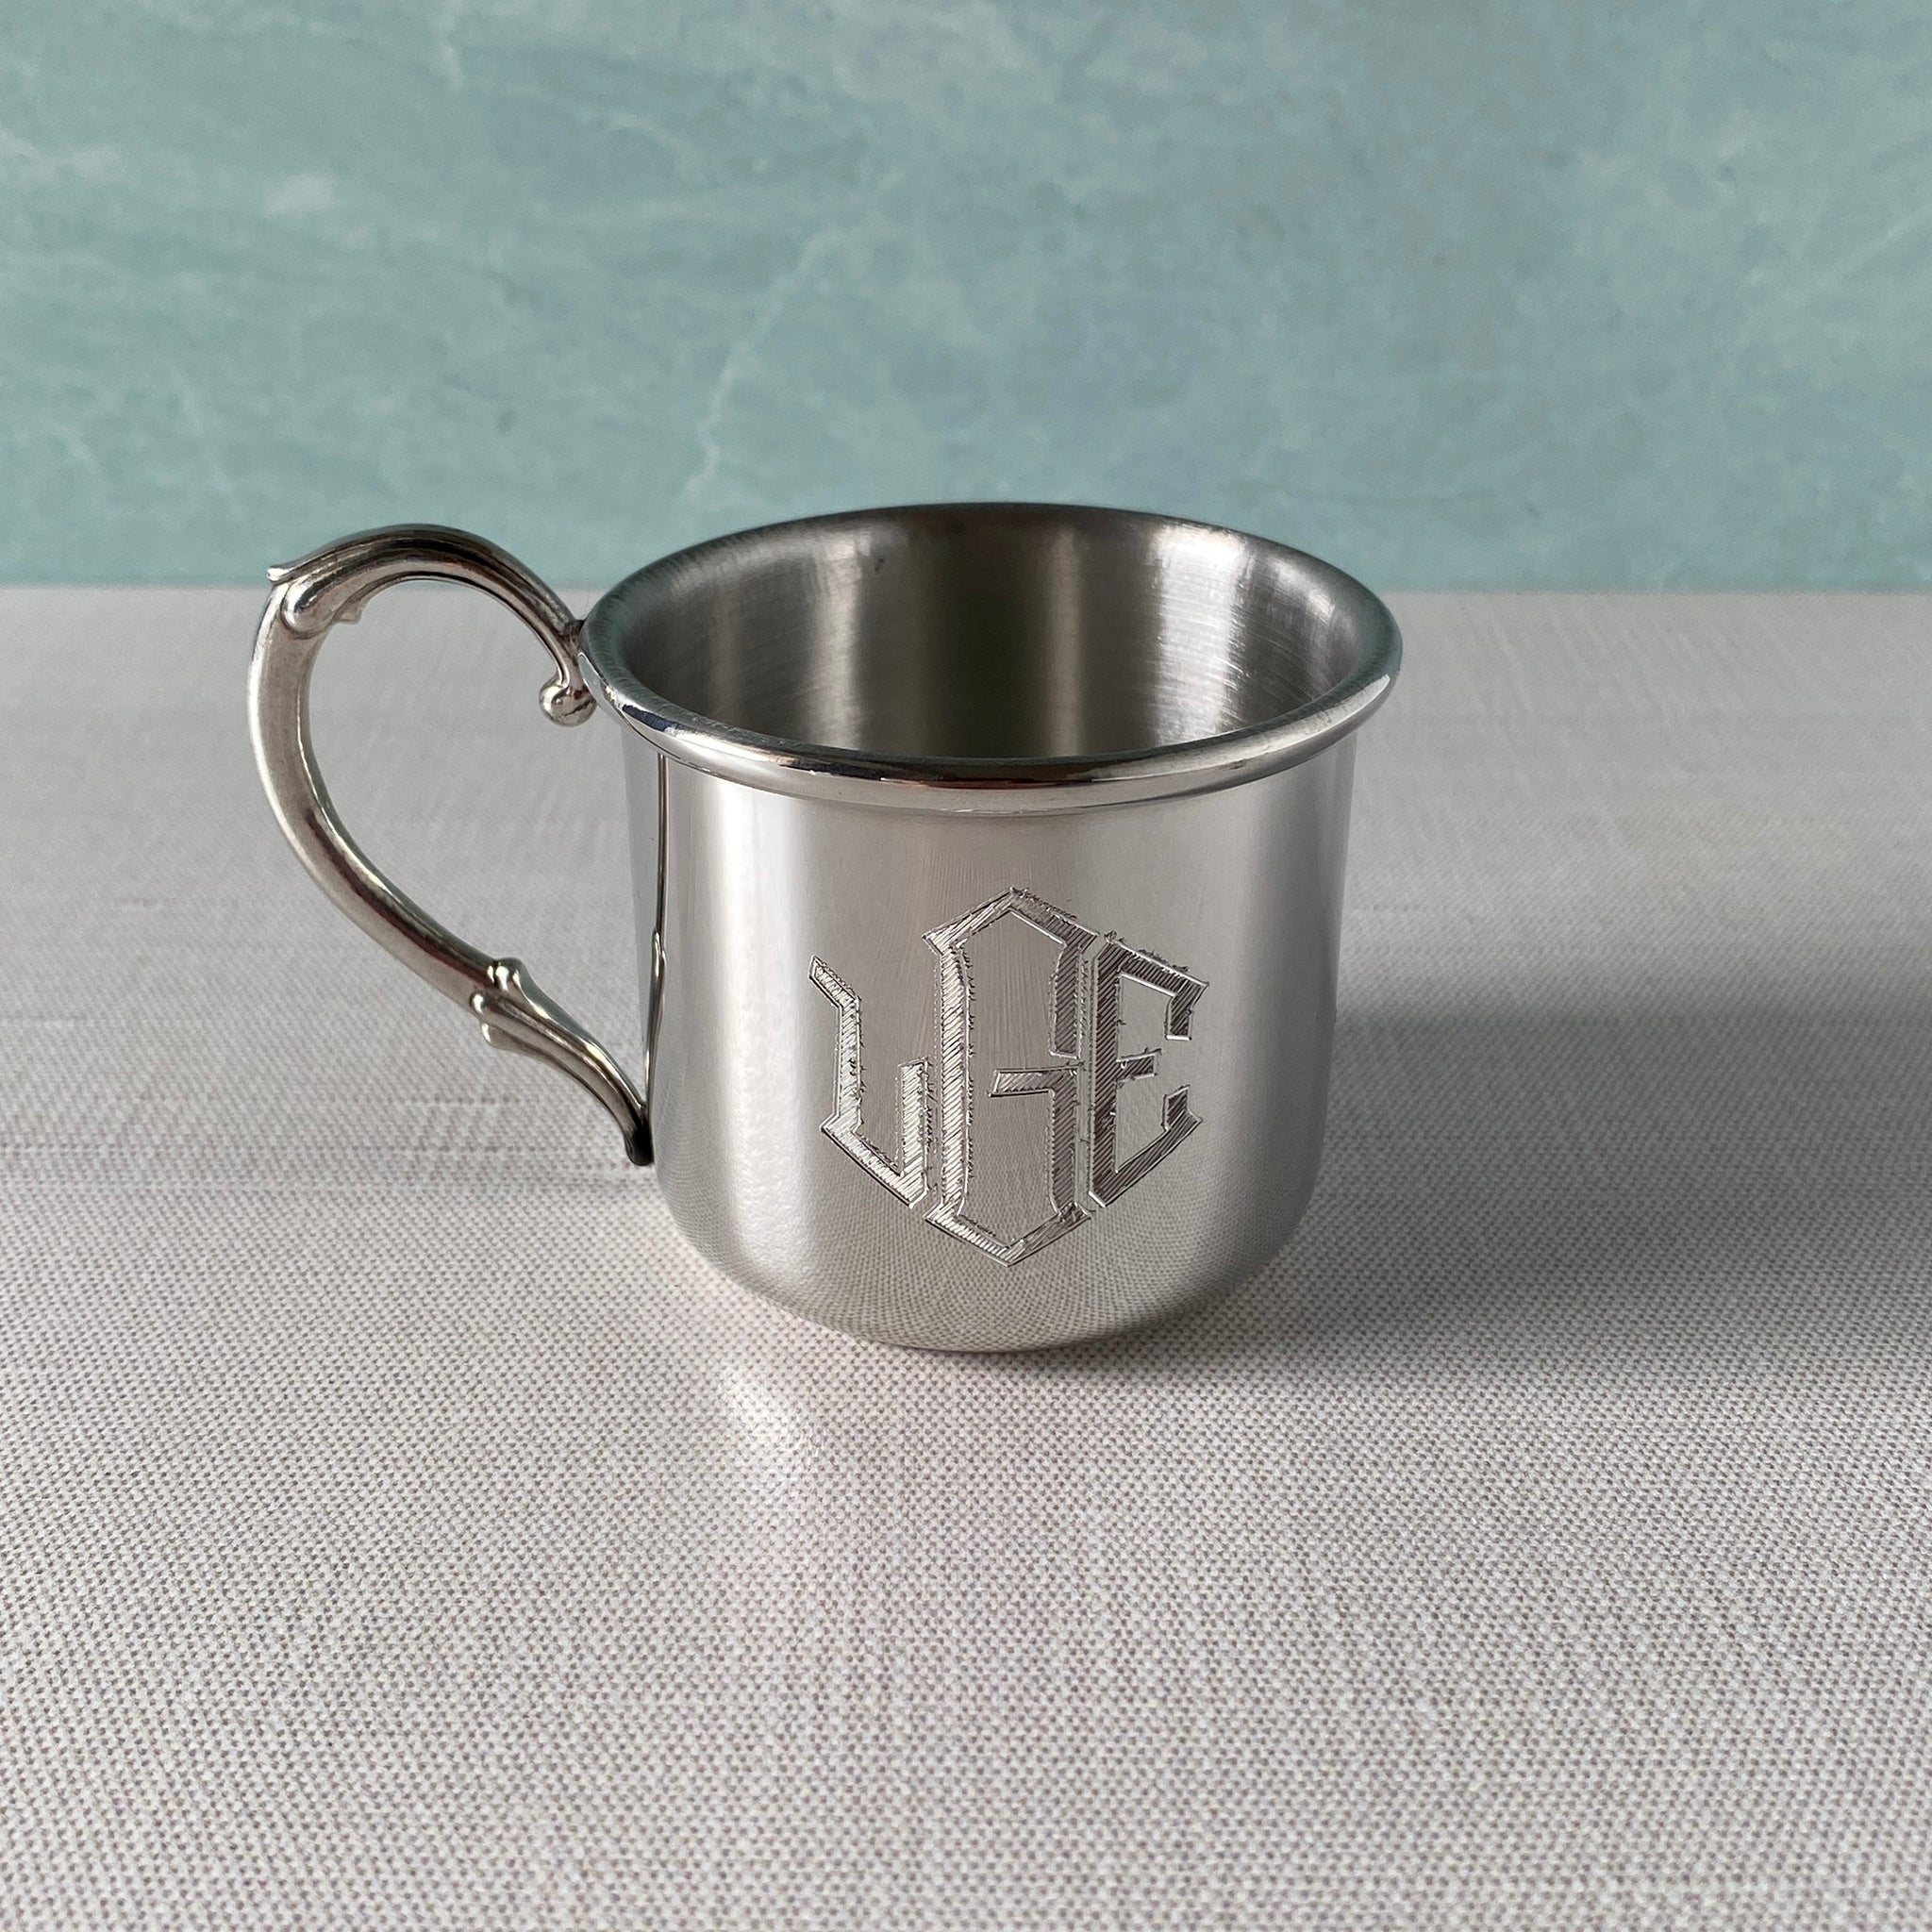 Pewter Easton Cross Baby Cup with machine engraved Diamond Monogram